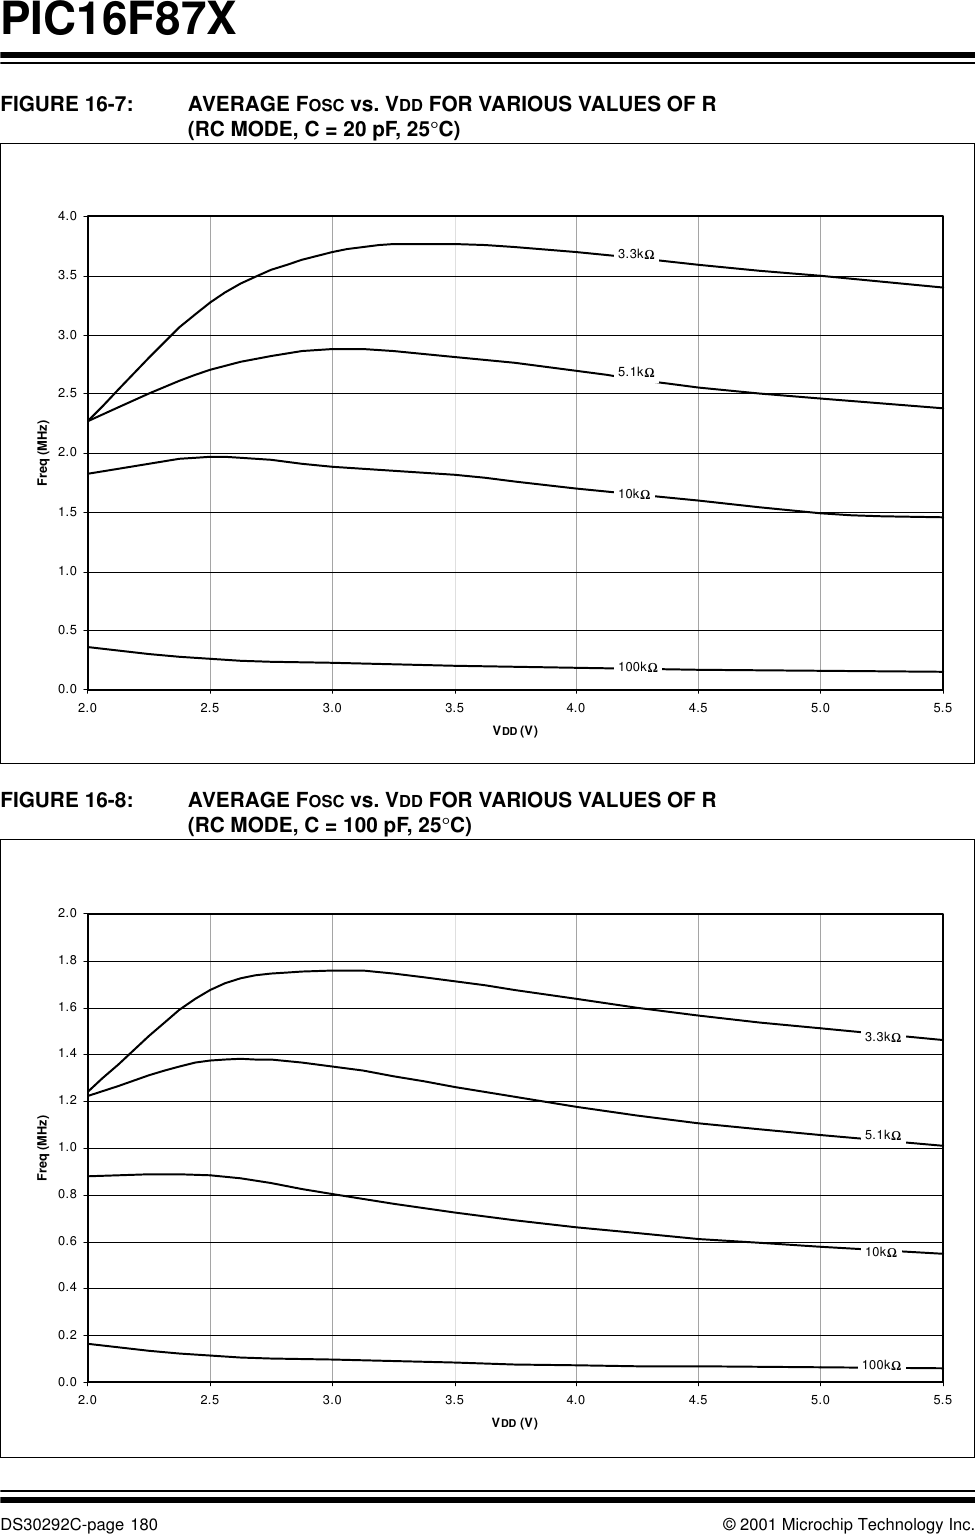 PIC16F87XDS30292C-page 180 © 2001 Microchip Technology Inc.FIGURE 16-7: AVERAGE FOSC vs. VDD FOR VARIOUS VALUES OF R (RC MODE, C = 20 pF, 25°C)FIGURE 16-8: AVERAGE FOSC vs. VDD FOR VARIOUS VALUES OF R(RC MODE, C = 100 pF, 25°C)0.00.51.01.52.02.53.03.54.02.02.53.03.54.04.55.05.5VDD (V)Freq (MHz)3.3kΩ5.1kΩ10kΩ100kΩ0.00.20.40.60.81.01.21.41.61.82.02.02.53.03.54.04.55.05.5VDD (V)Freq (MHz)3.3kΩ5.1kΩ10kΩ100kΩ